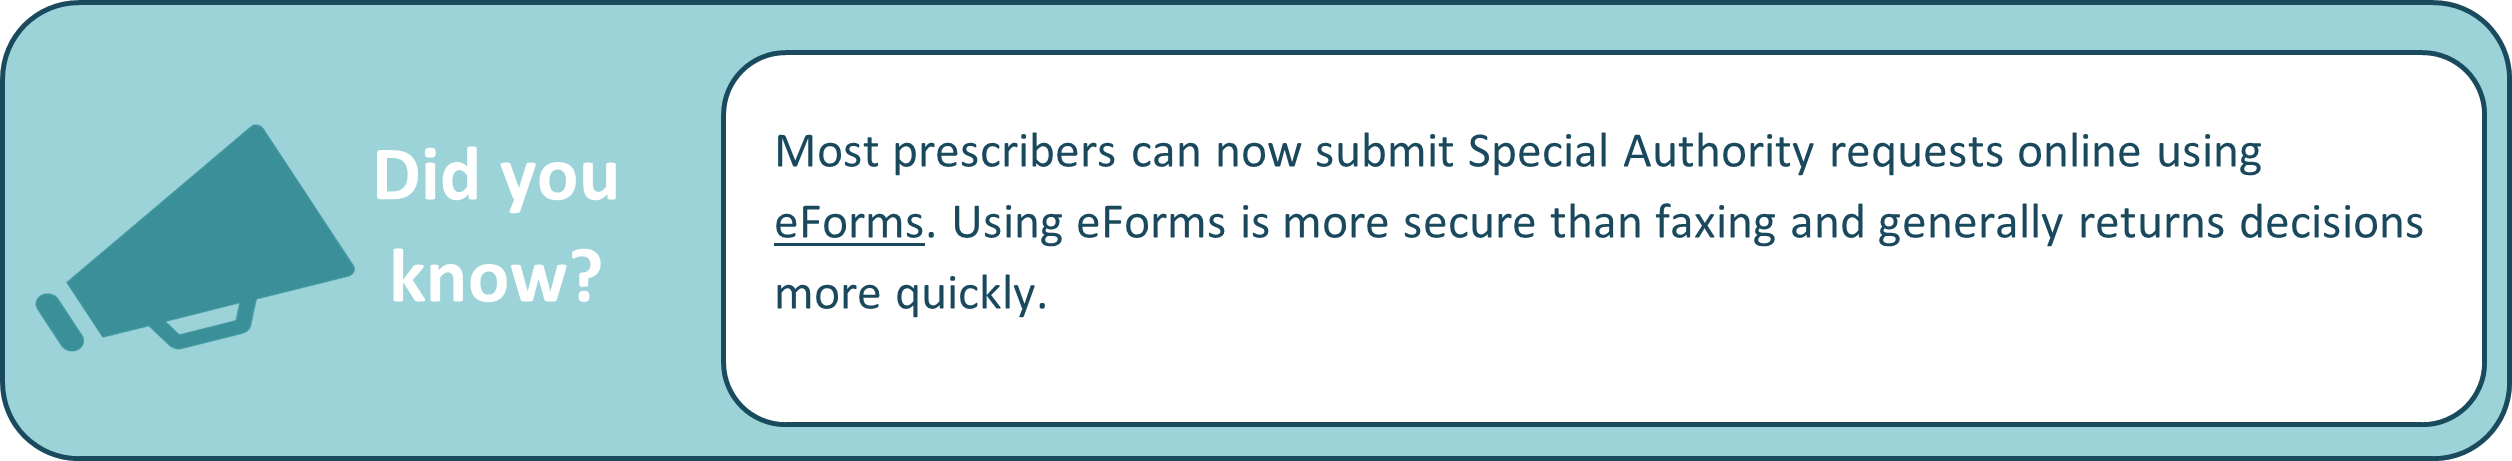 Most prescribers can now submit Special Authority requests online using eForms. Using eForms is more secure than faxing and generally returns decisions more quickly.